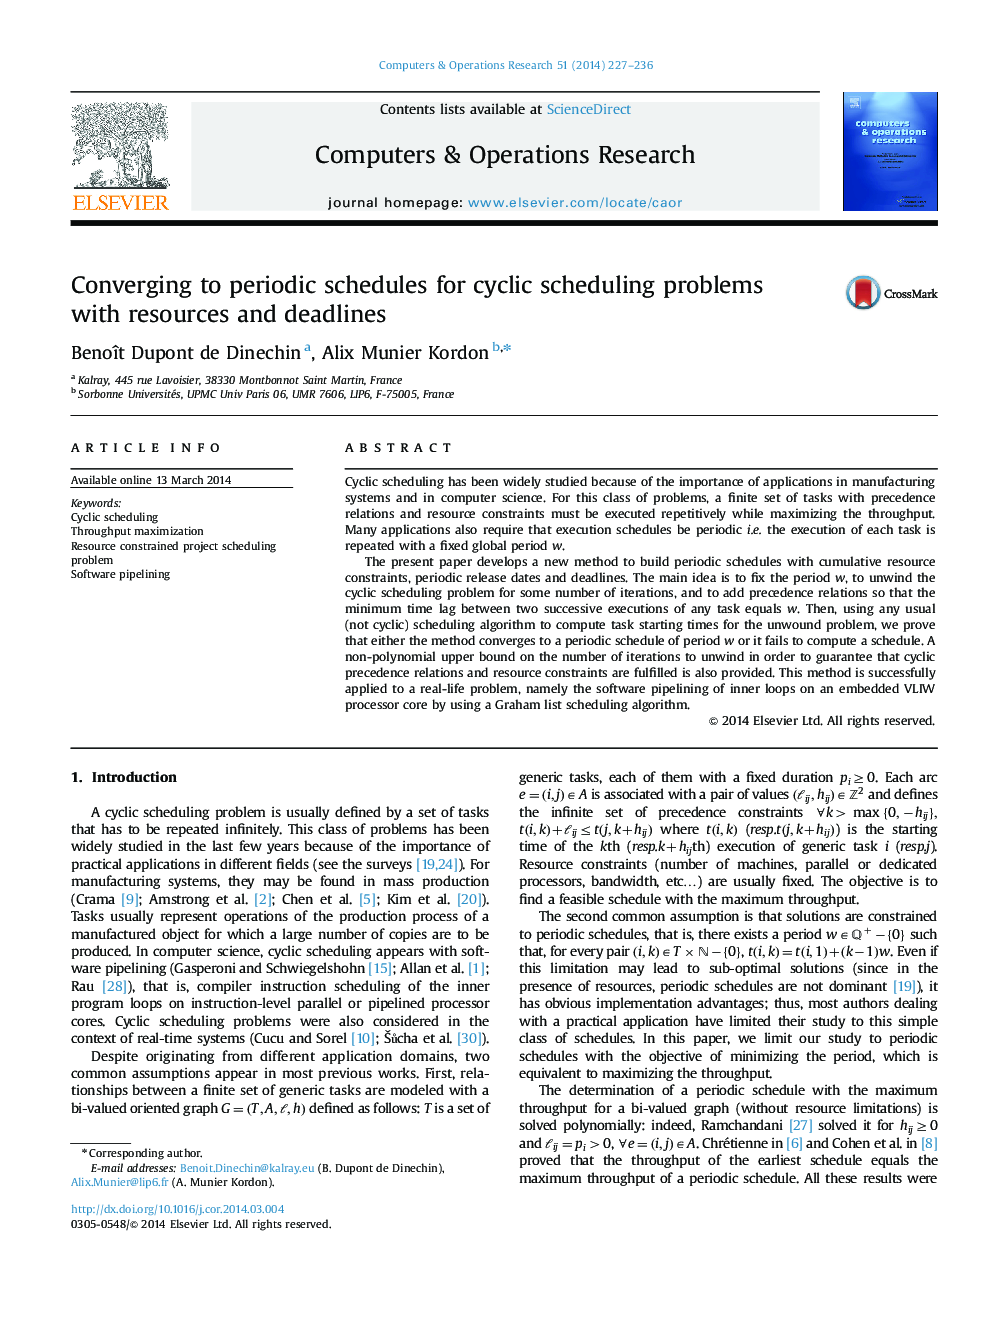 Converging to periodic schedules for cyclic scheduling problems with resources and deadlines